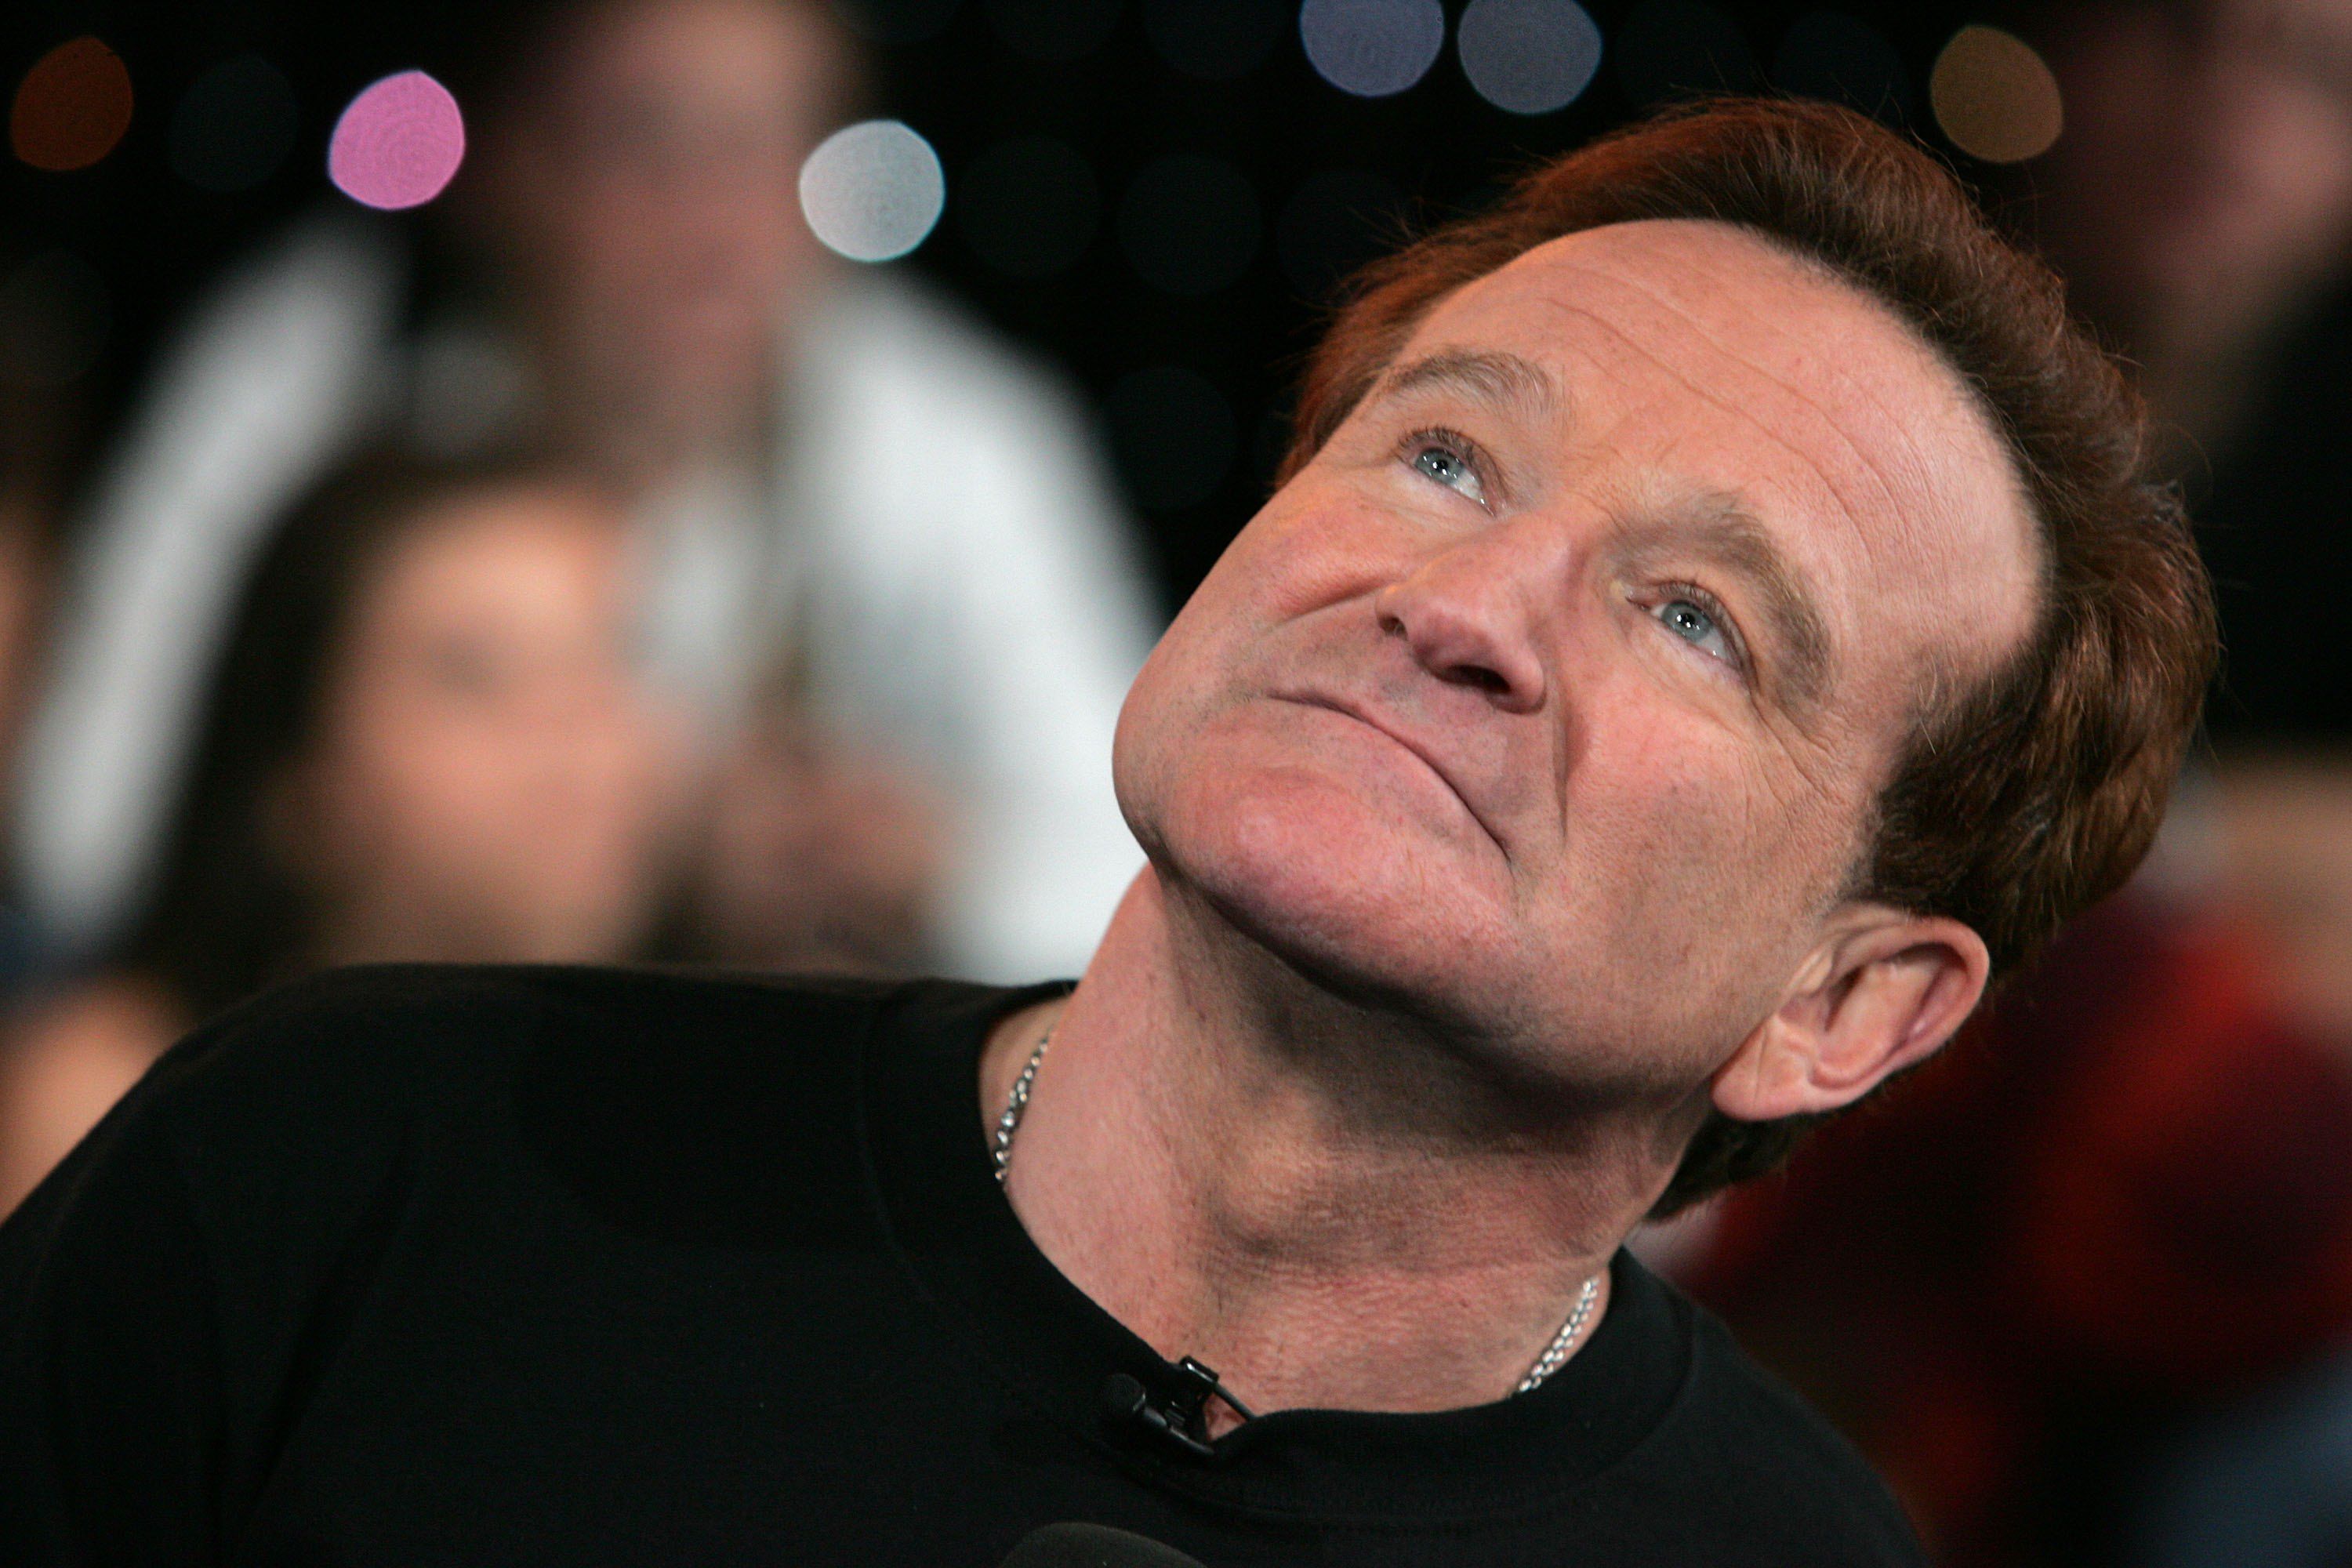 NEW YORK - APRIL 27: (US TABLOIDS OUT) Actor Robin Williams appears onstage during MTV's Total Request Live at the MTV Times Square Studios on April 27, 2006 in New York City. (Photo by Peter Kramer/Getty Images)